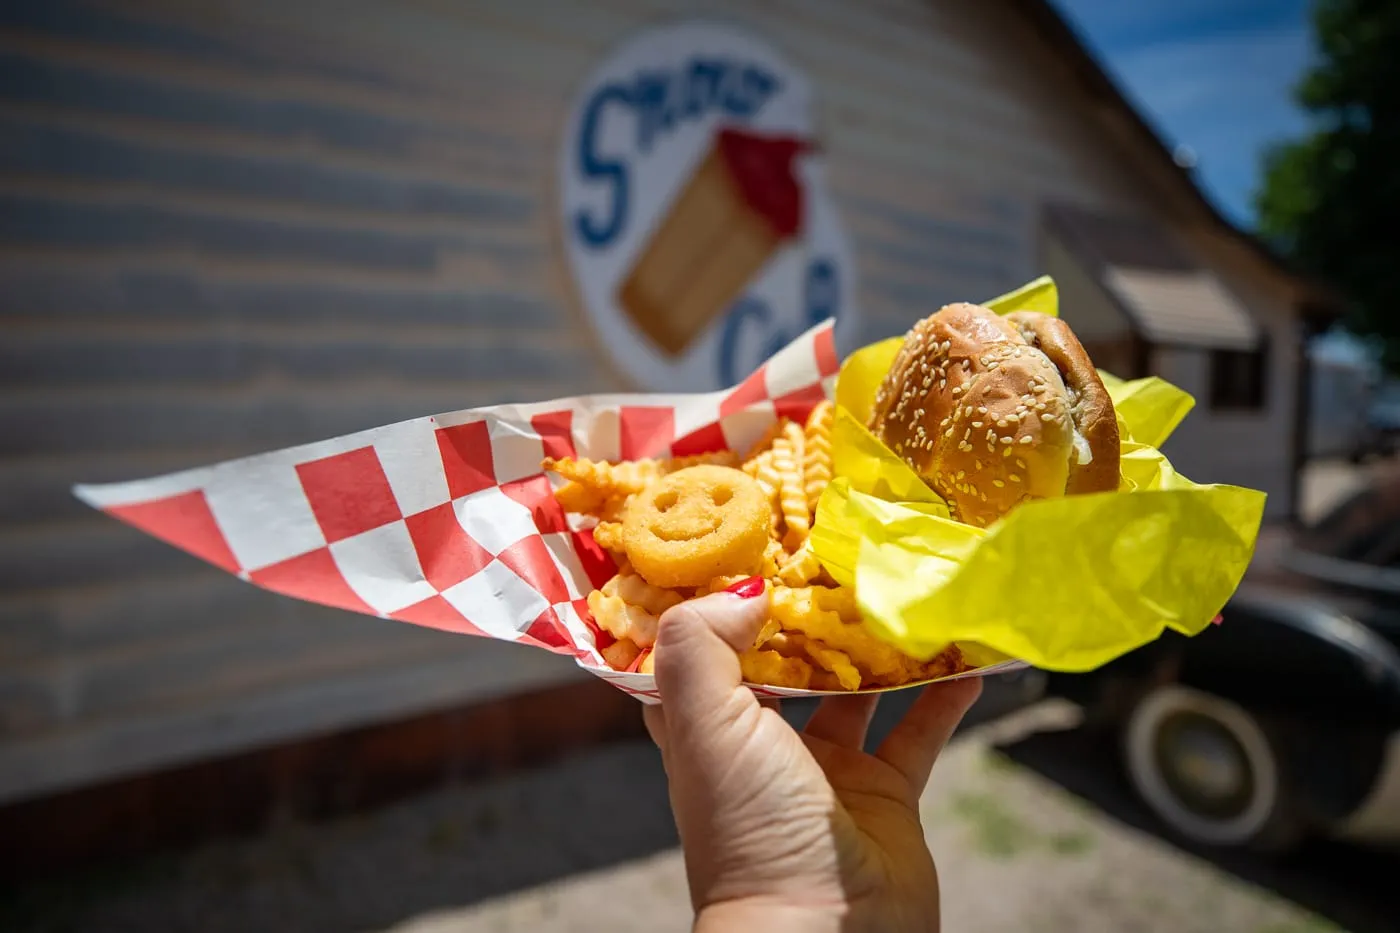 Cheeseburger with cheese, fries, a Smiles face fry, and a chocolate milkshake at Delgadillo’s Snow Cap in Seligman, Arizona - Route 66 restaurant and Drive-In Diner